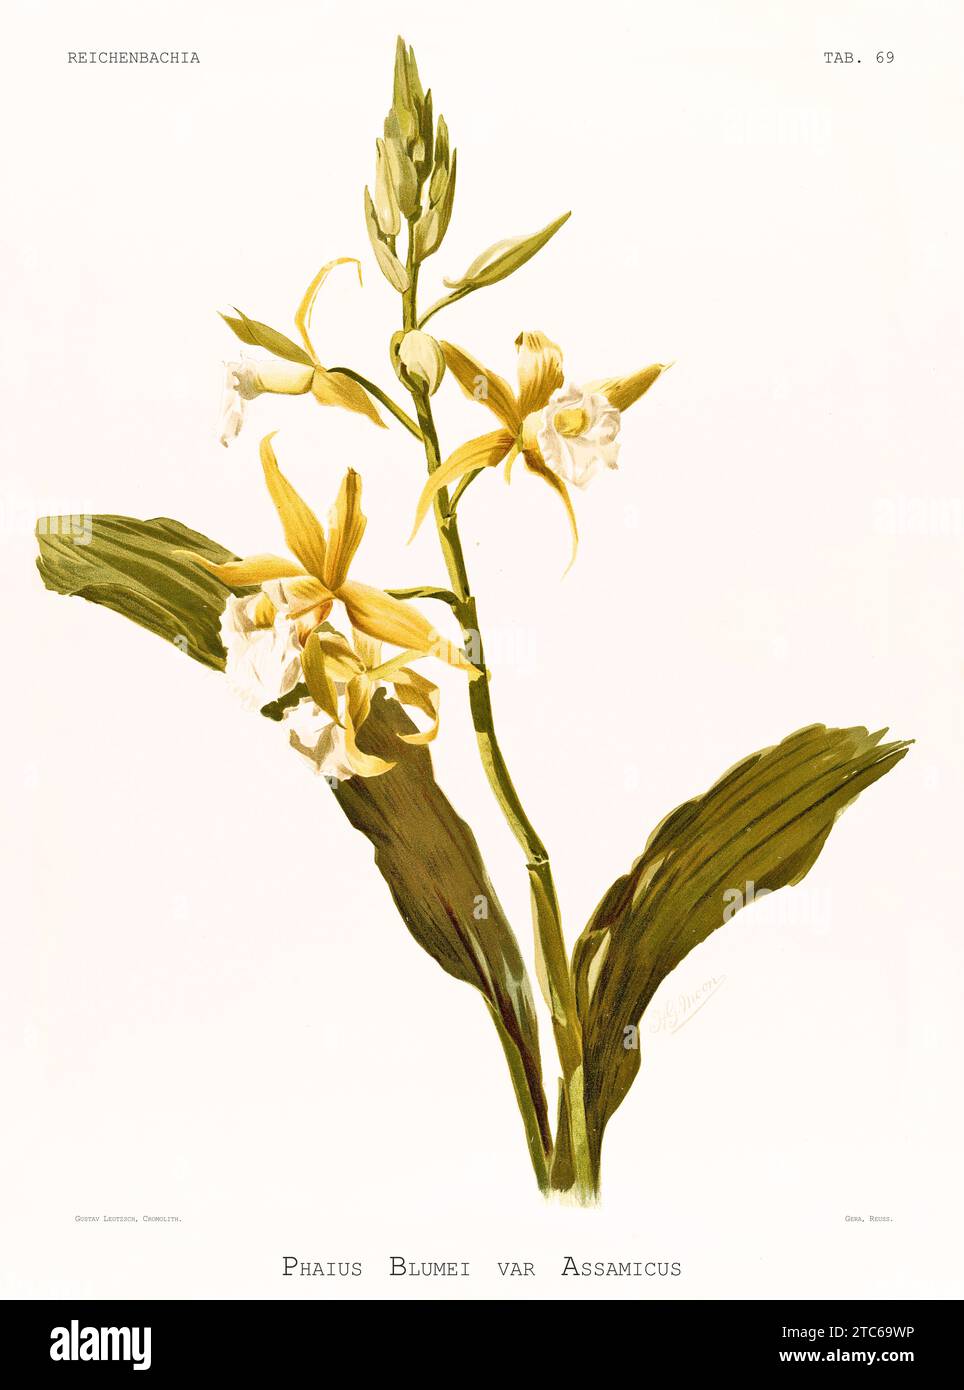 Old illustration of Nun's Orchid (Phaius tankervilleae). Reichenbachia, by F. Sander. St. Albans, UK, 1888 - 1894 Stock Photo